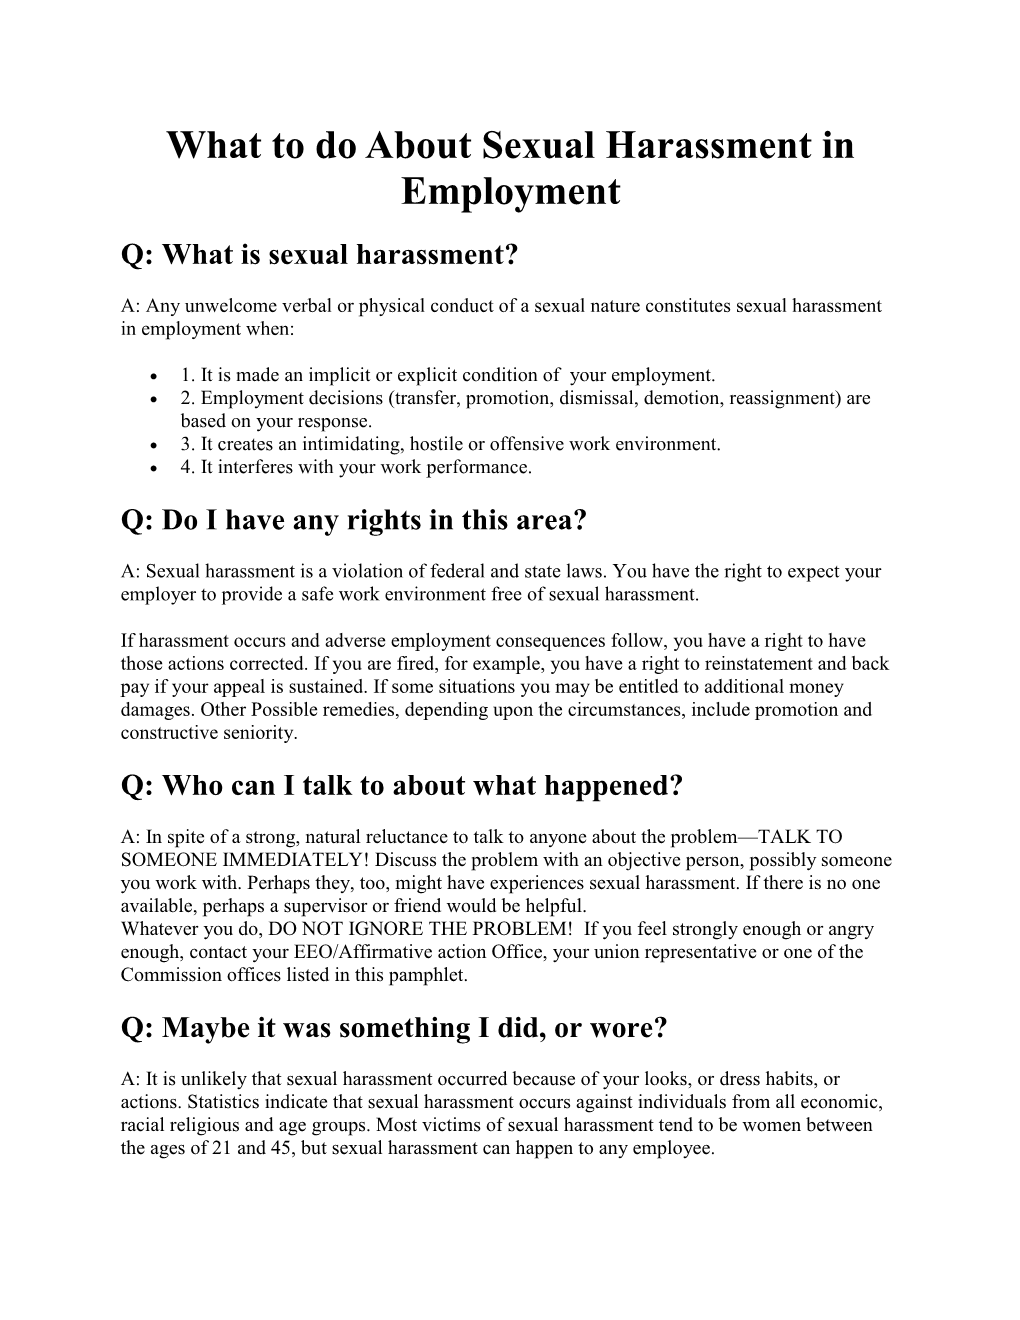 What to Do About Sexual Harassment in Employment Q: What Is Sexual Harassment?